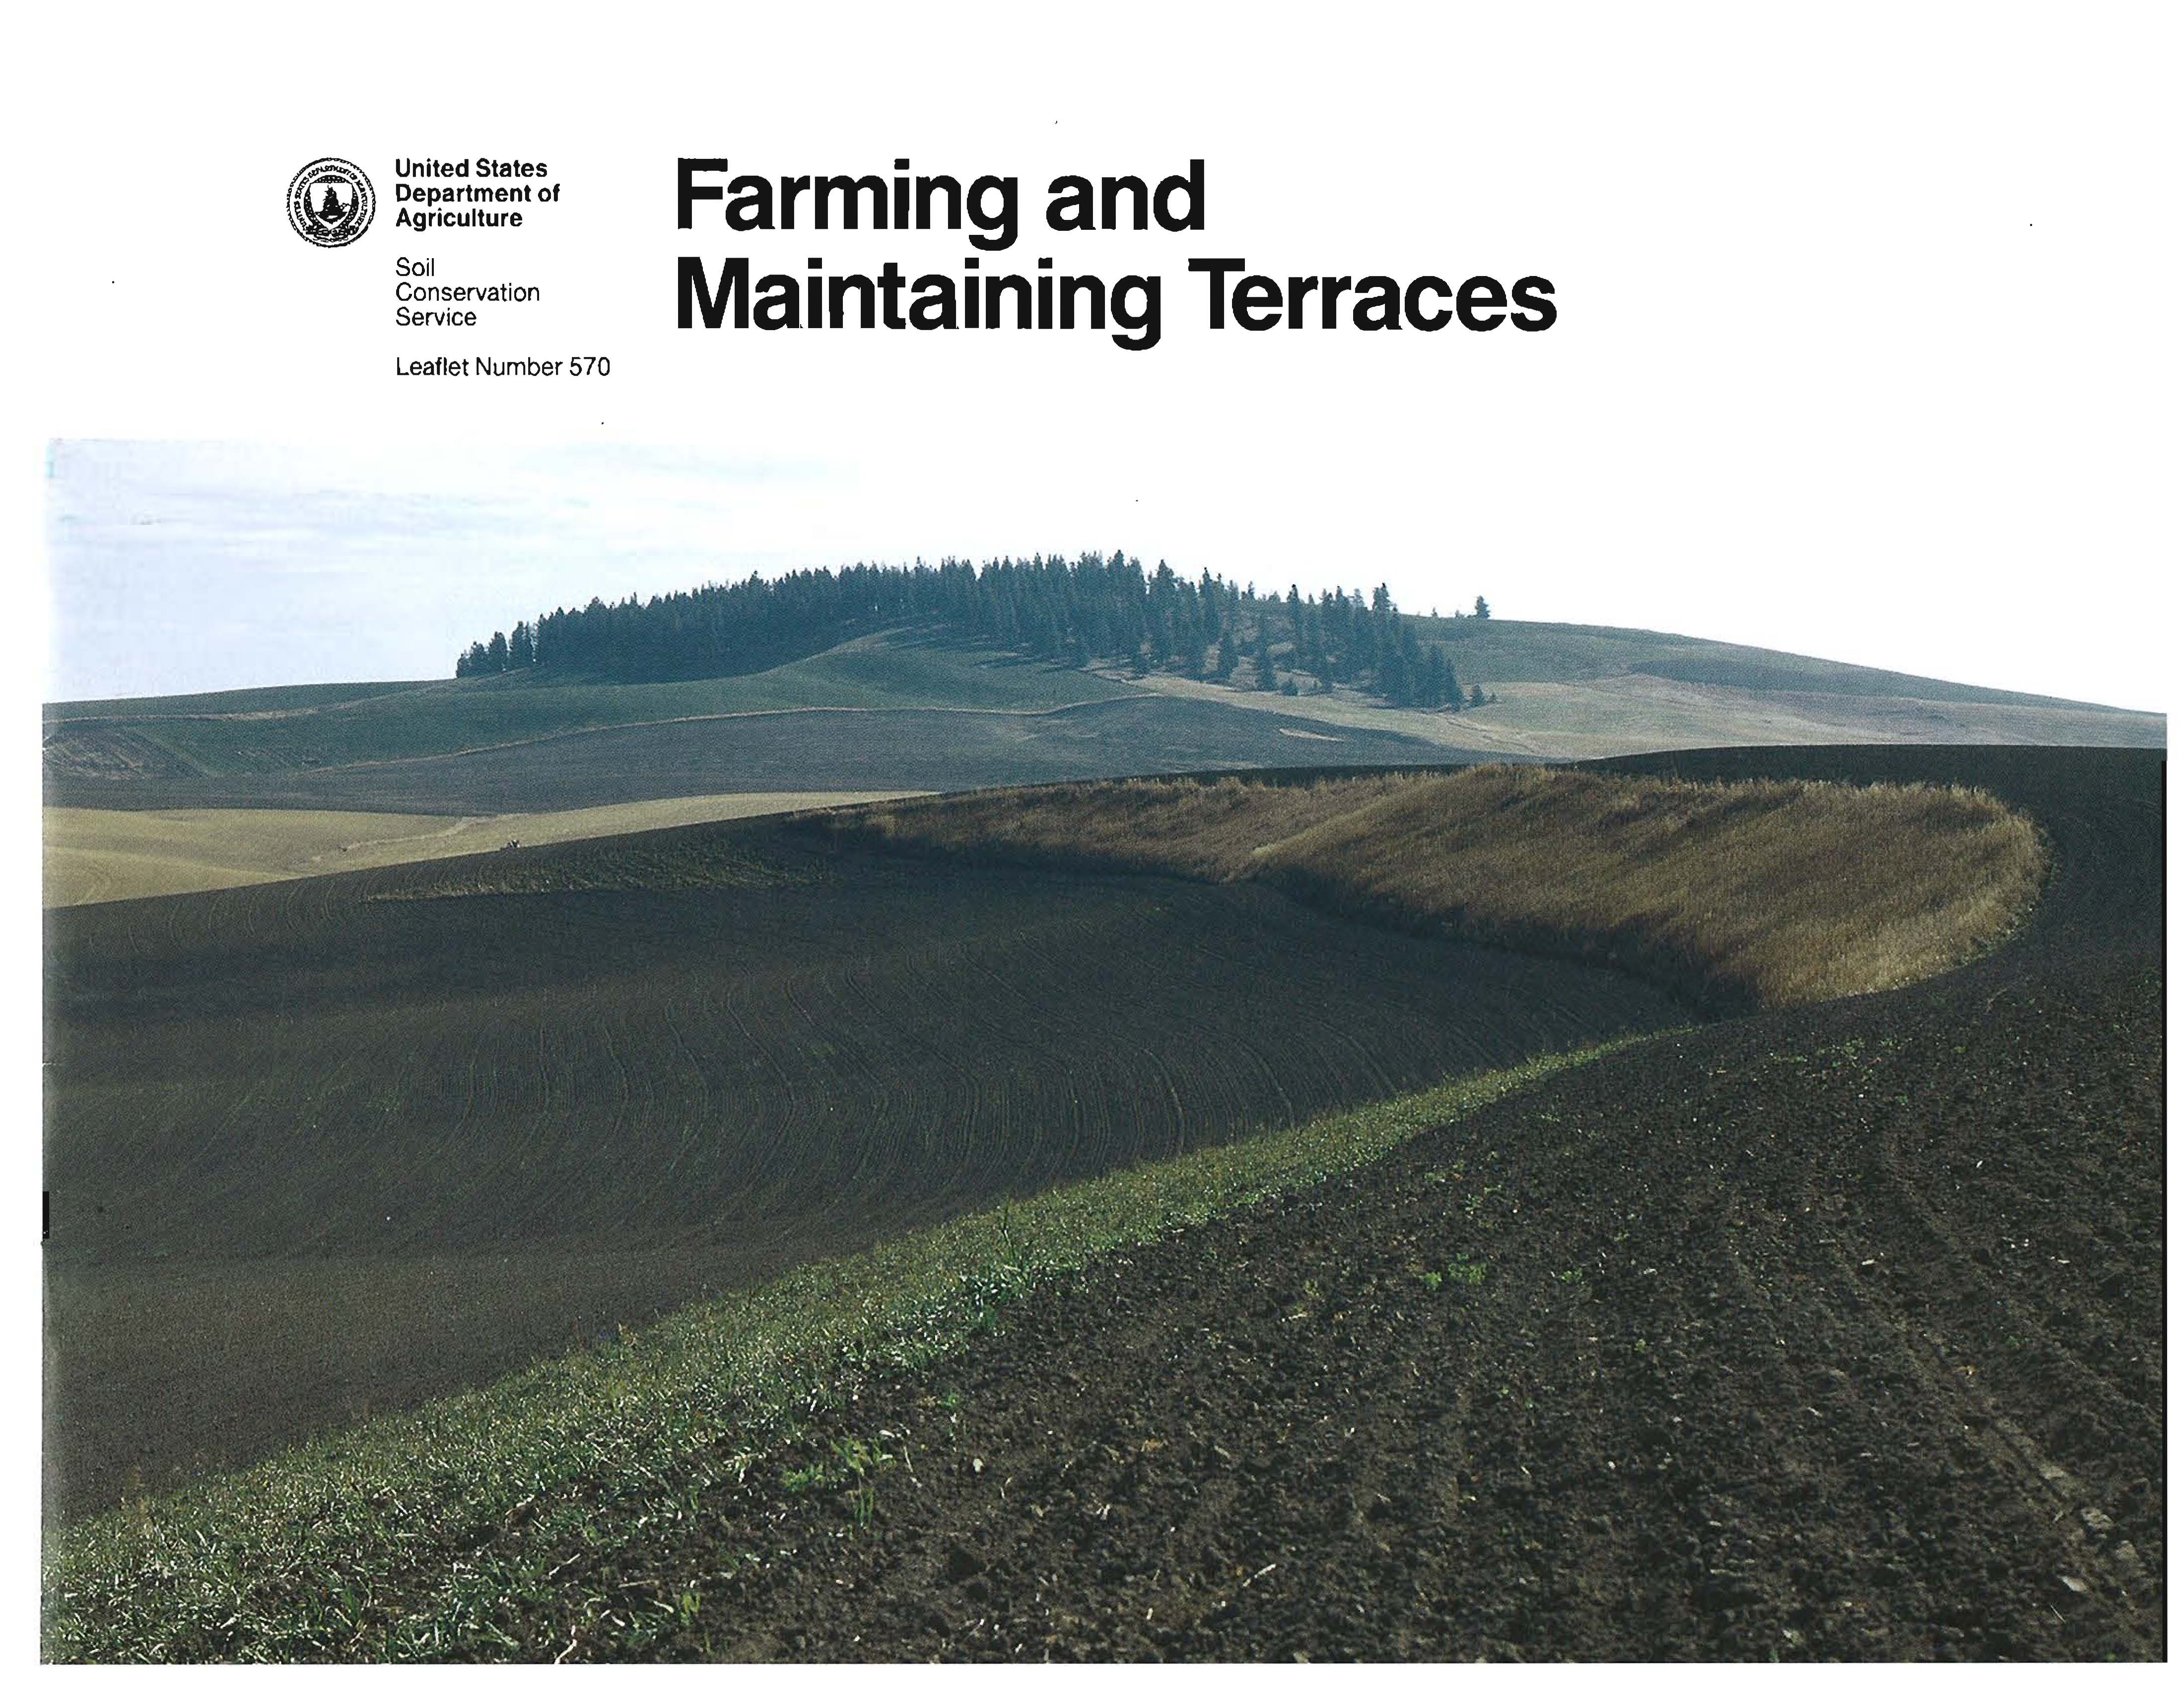 Farming and Maintaining Terraces